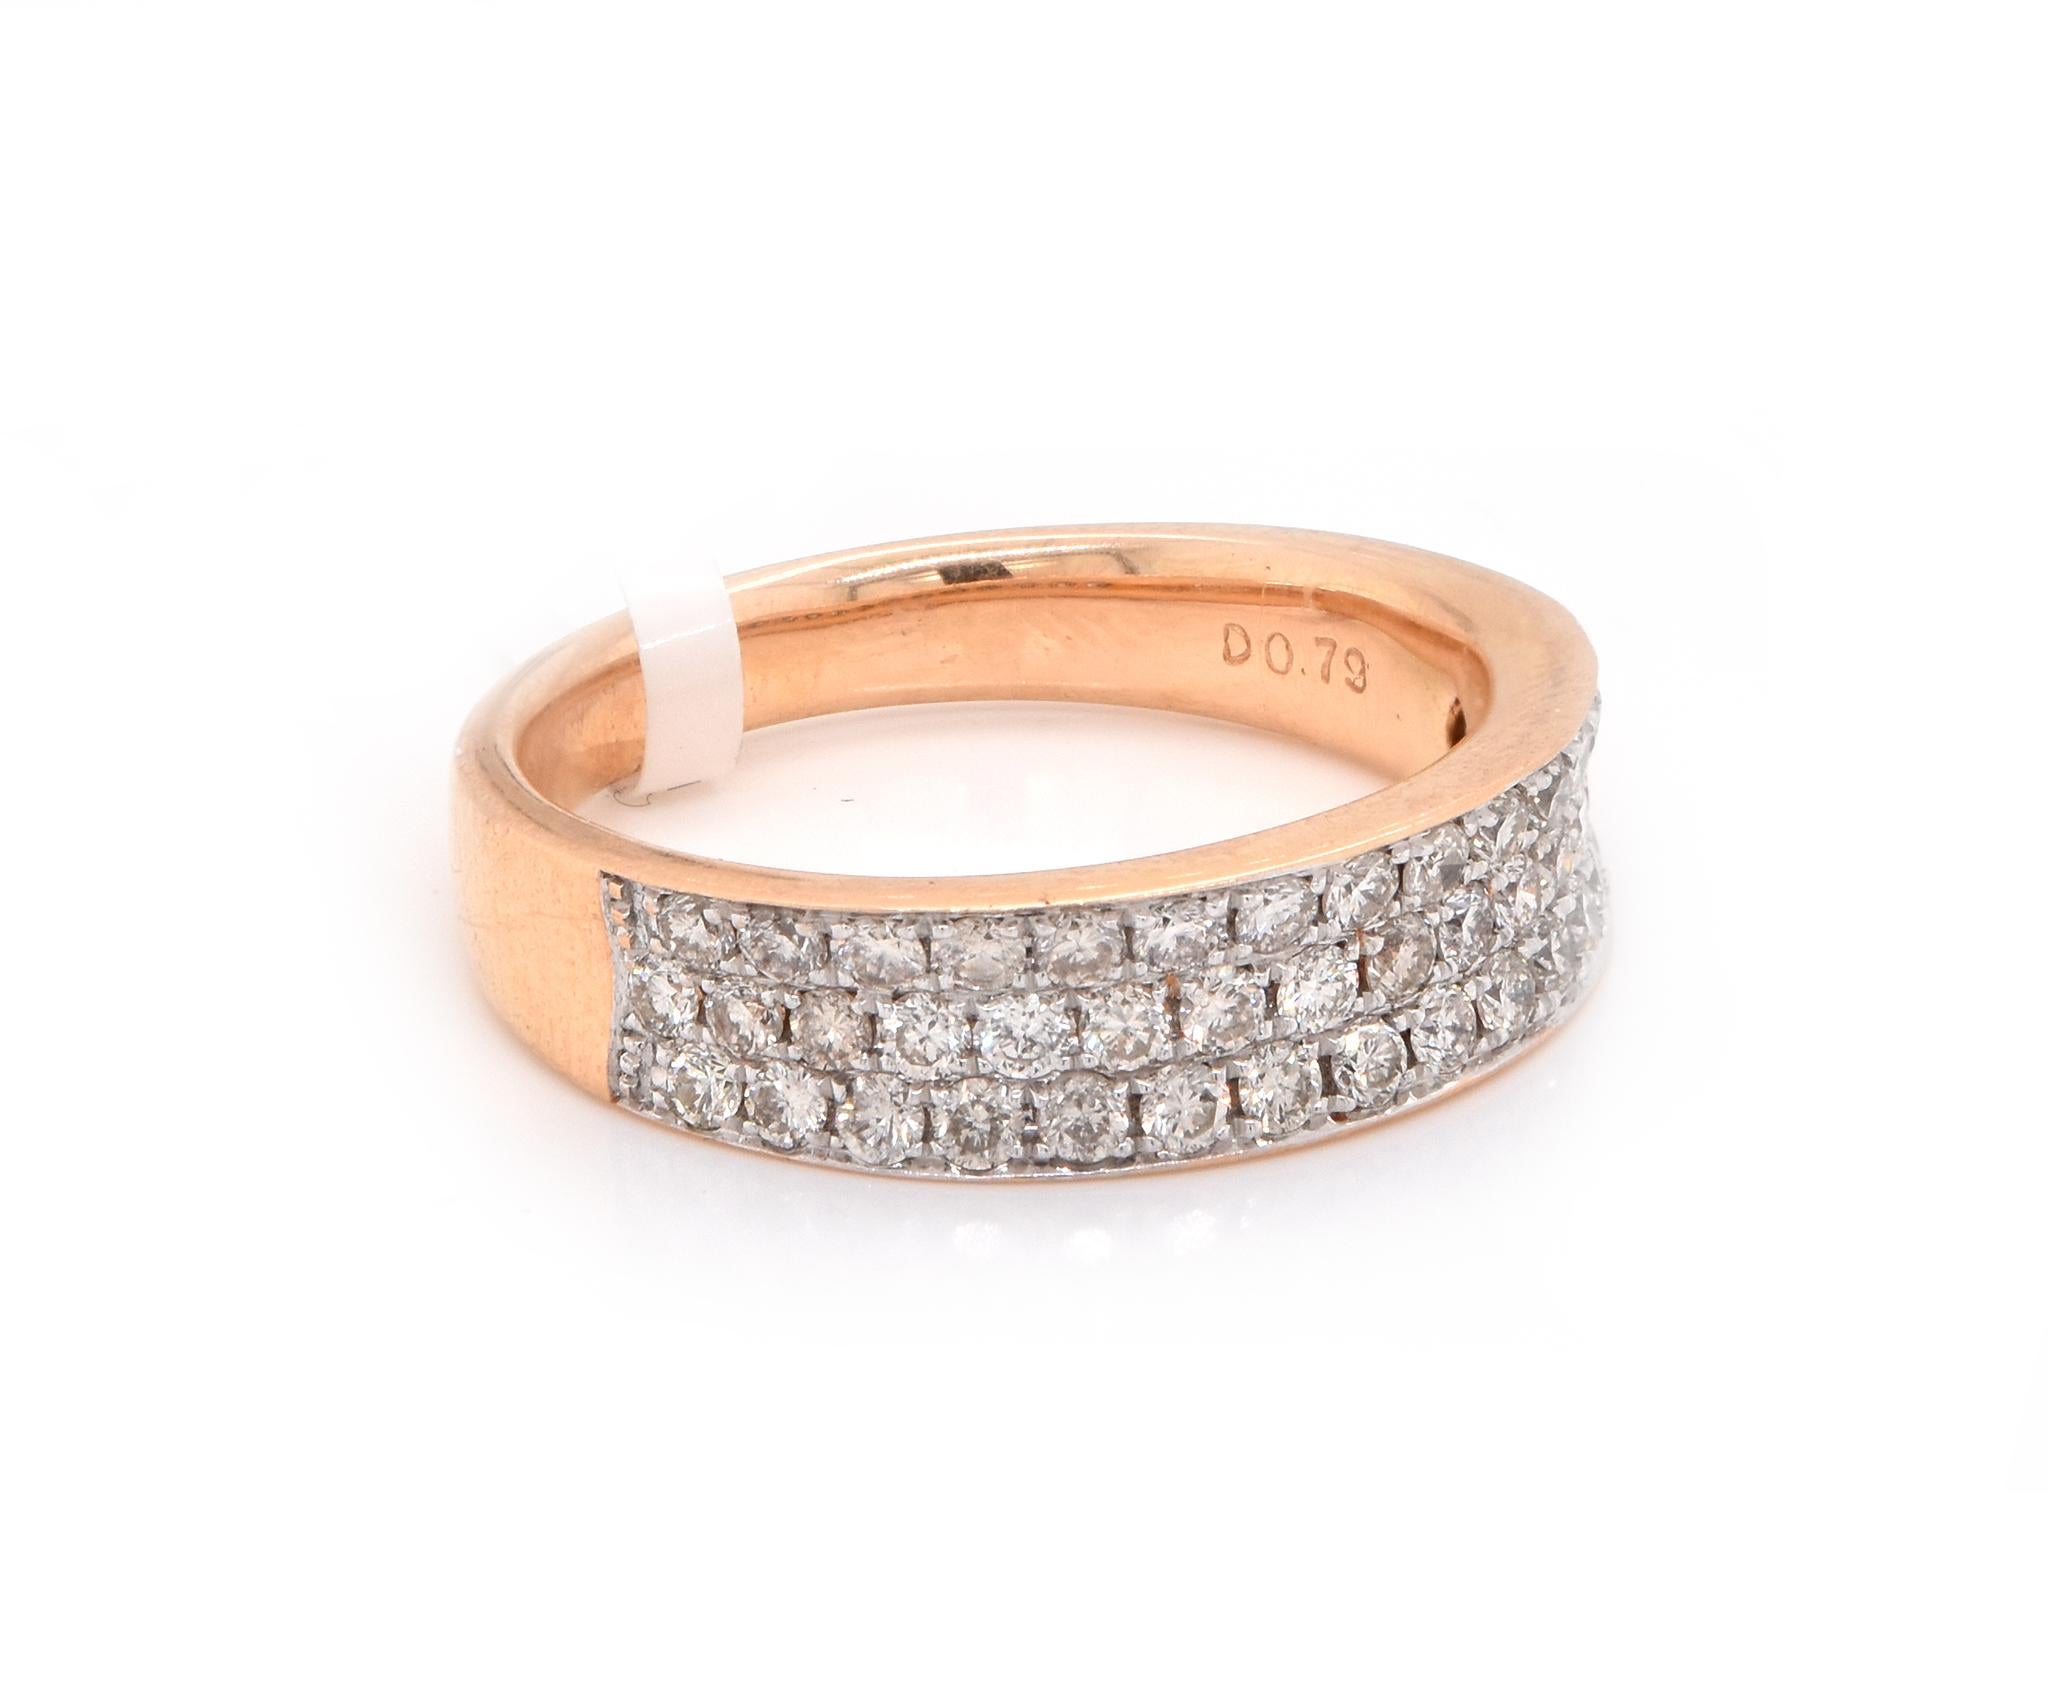 Designer: Custom
Material: 18K rose gold
Diamonds: 47 round cut = .79cttw
Color: G
Clarity: VS
Size: 6.75
Dimensions: ring measures 5.5mm in width
Weight: 4.45 grams
